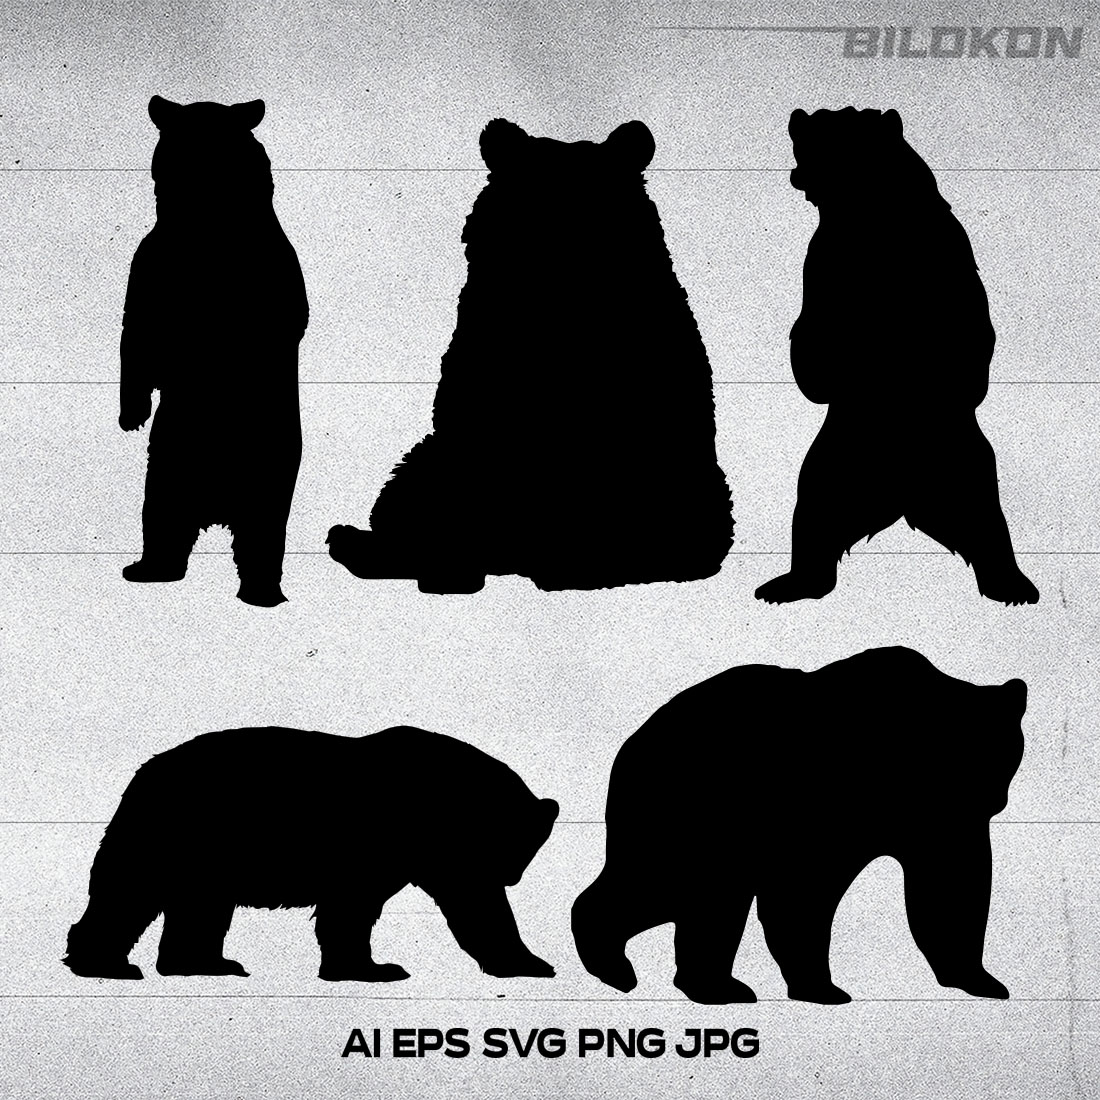 The silhouettes of a bear and a bear cub.